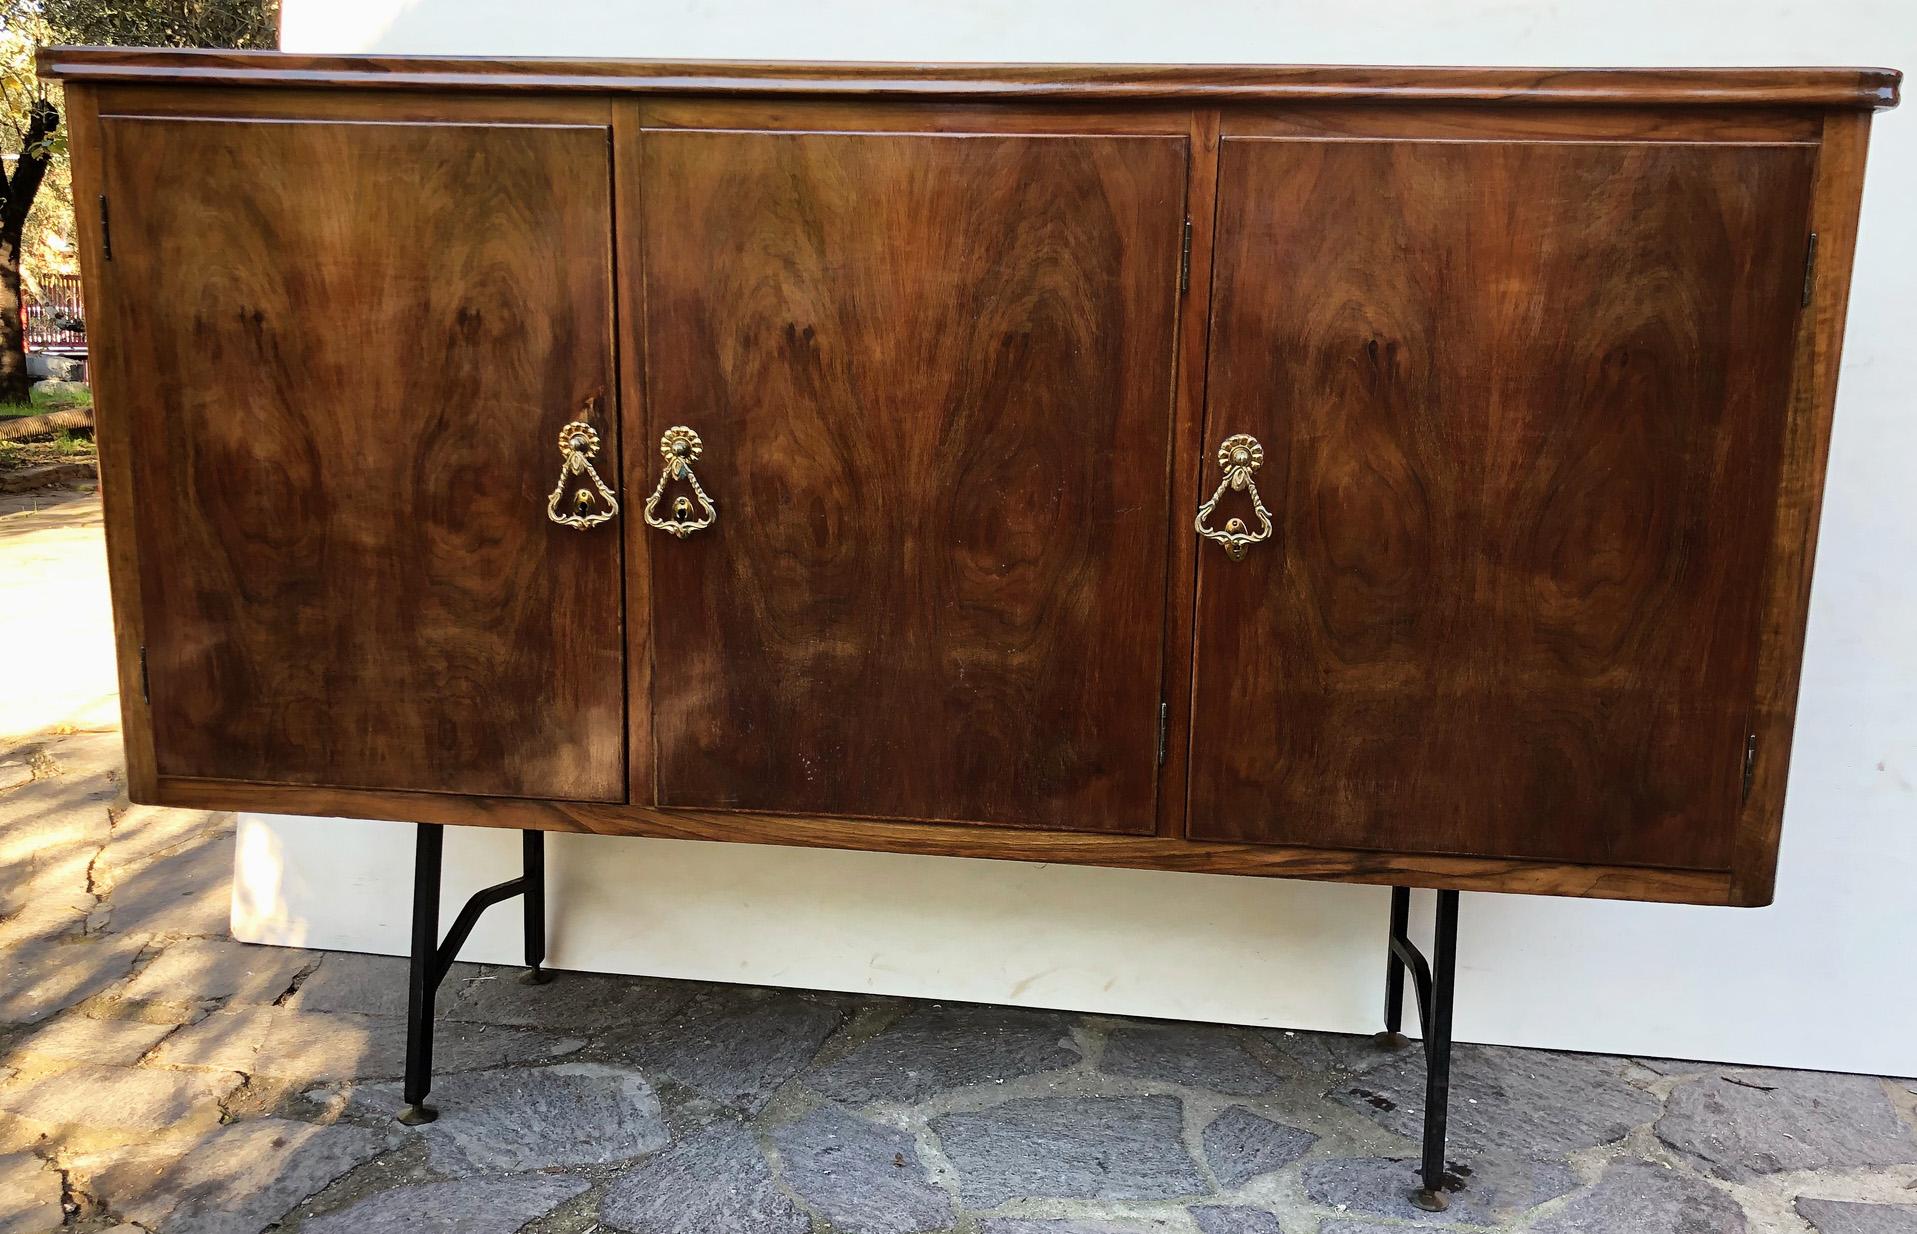 This is a very useful and capacious piece of furniture, which can be easily placed both at the entrance and in the living room, both in the kitchen and in the office
Original 1950 Italian sideboard in transversal veneered national walnut, with three